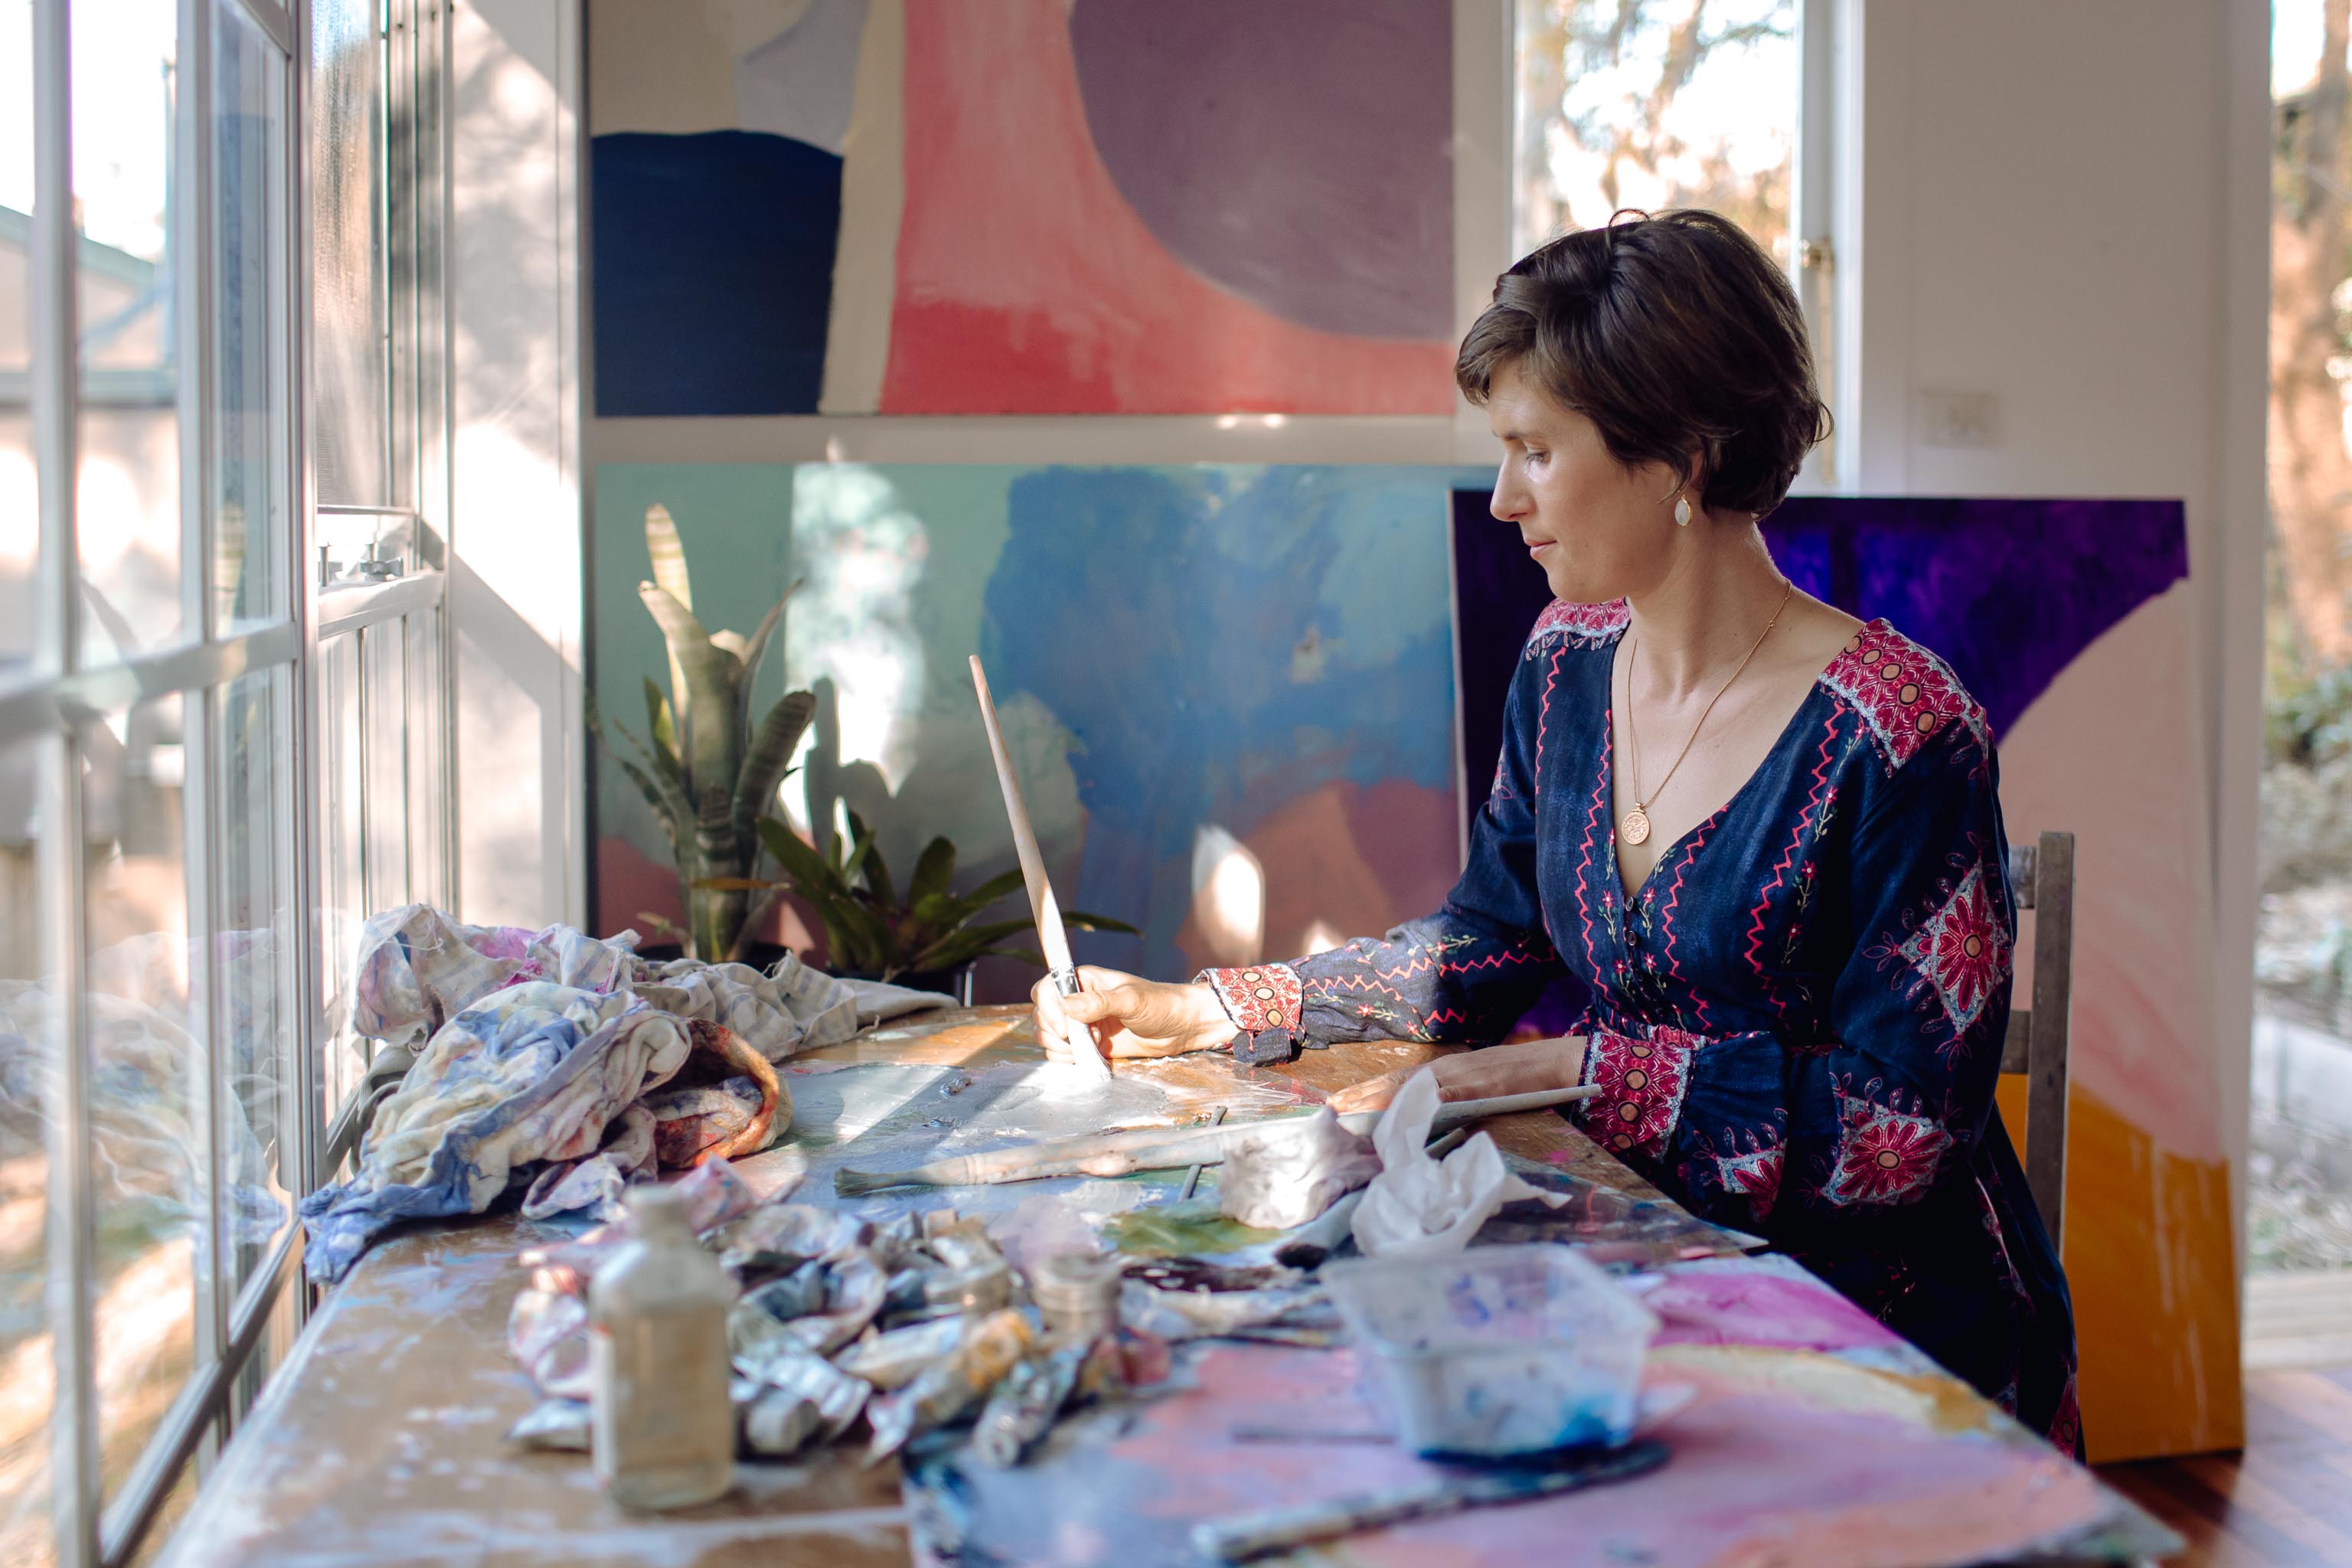 Our visit to the studio of Artist Pip Beauvoir